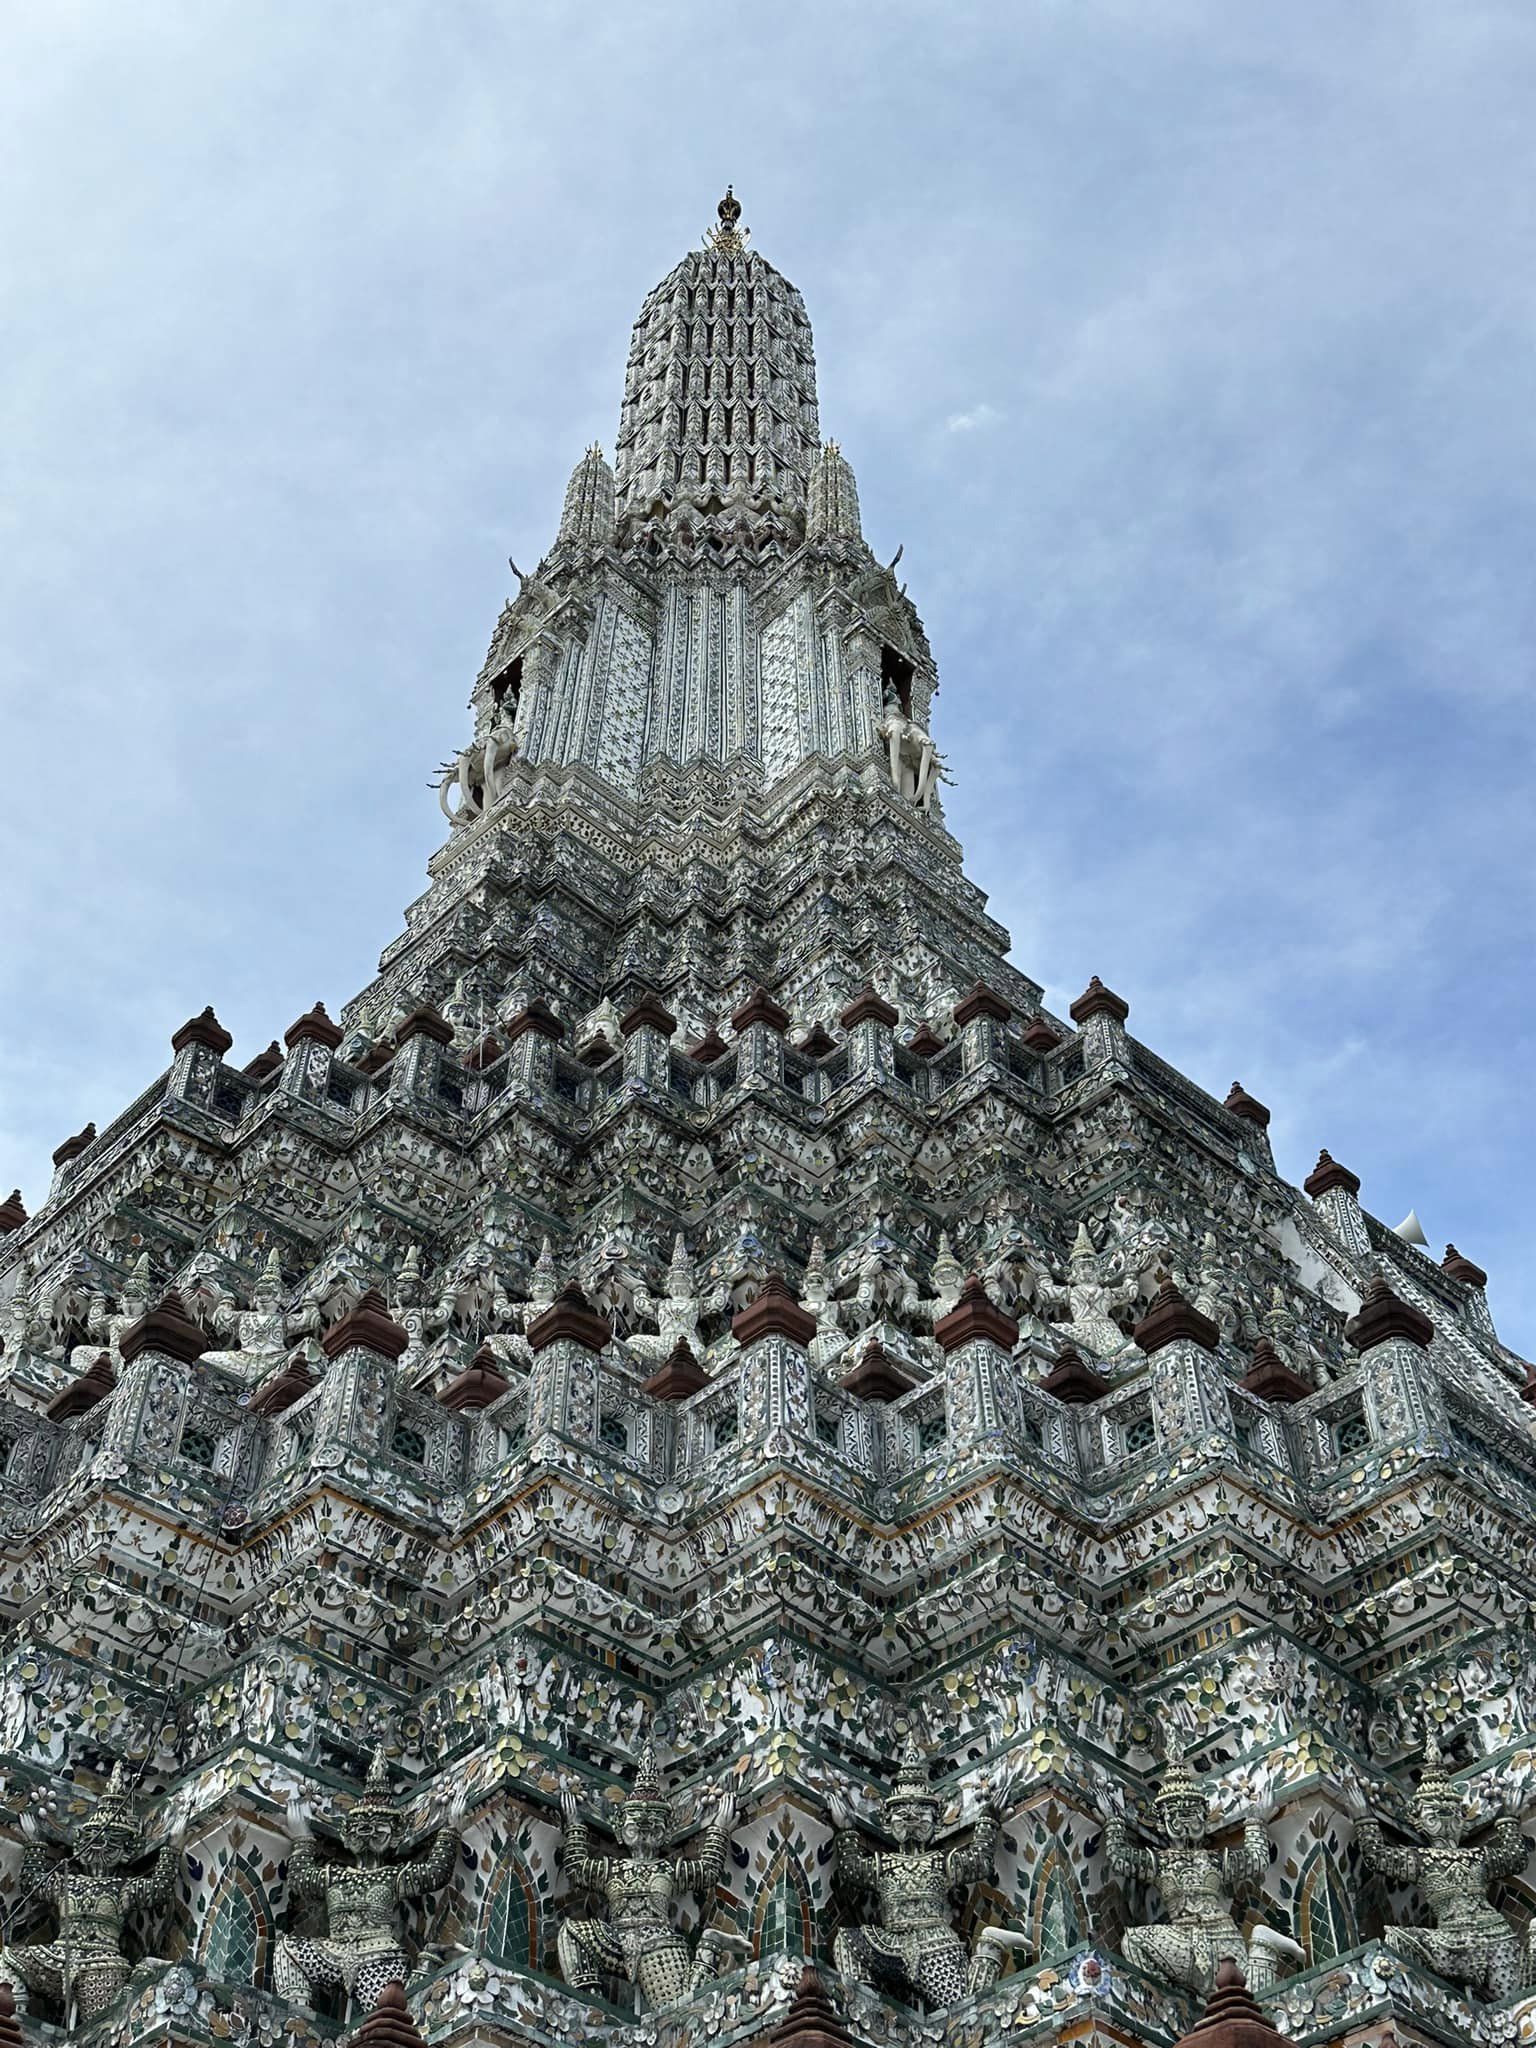 The Wat Arun’s spires is one of Thailand’s iconic landmarks